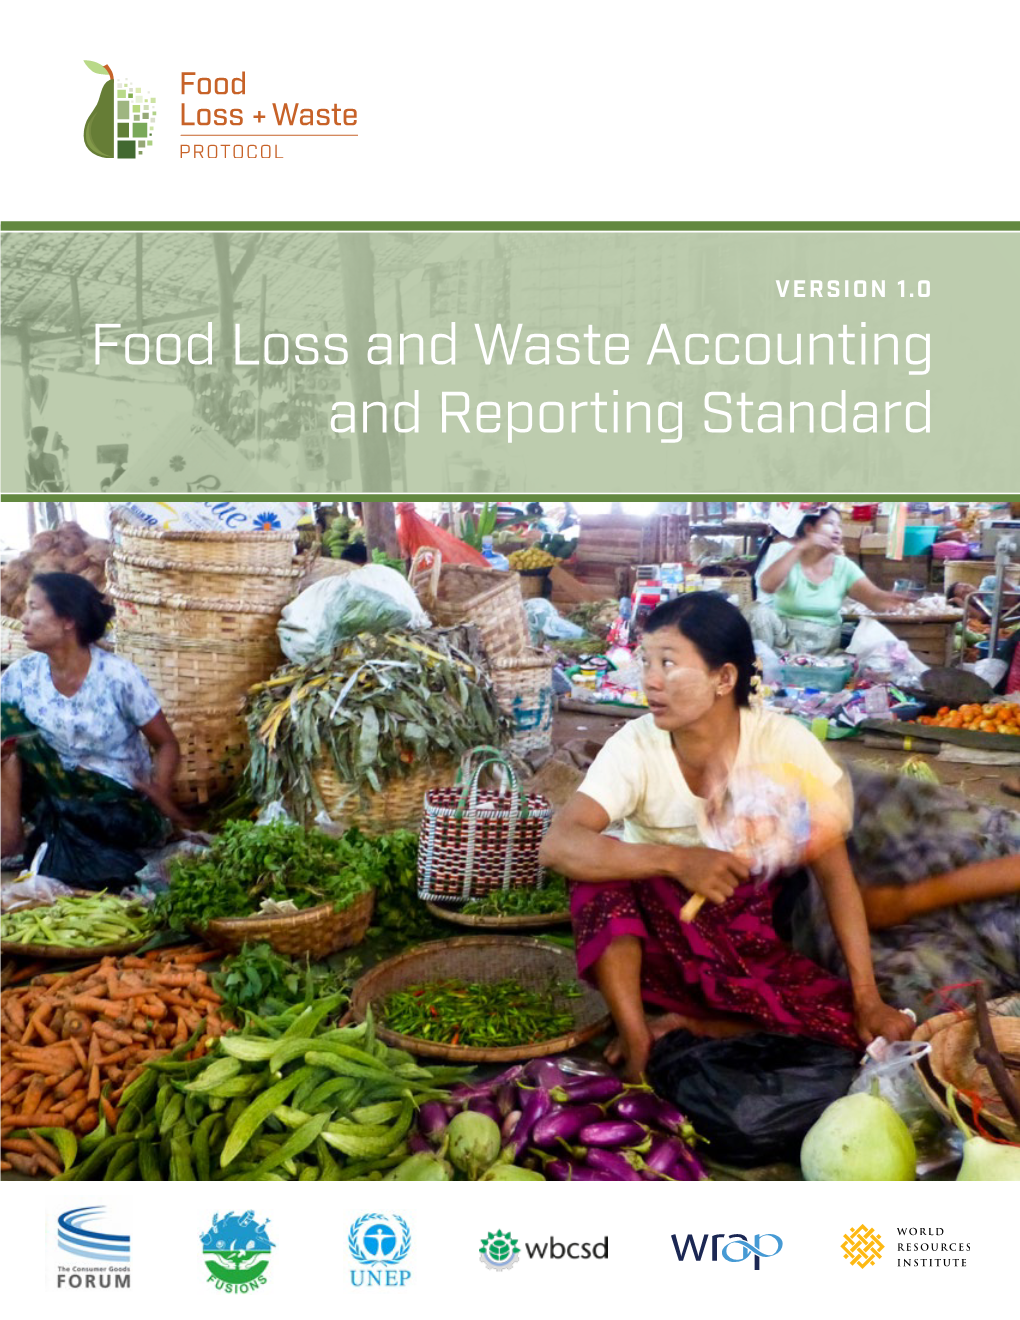 Food Loss and Waste Accounting and Reporting Standard